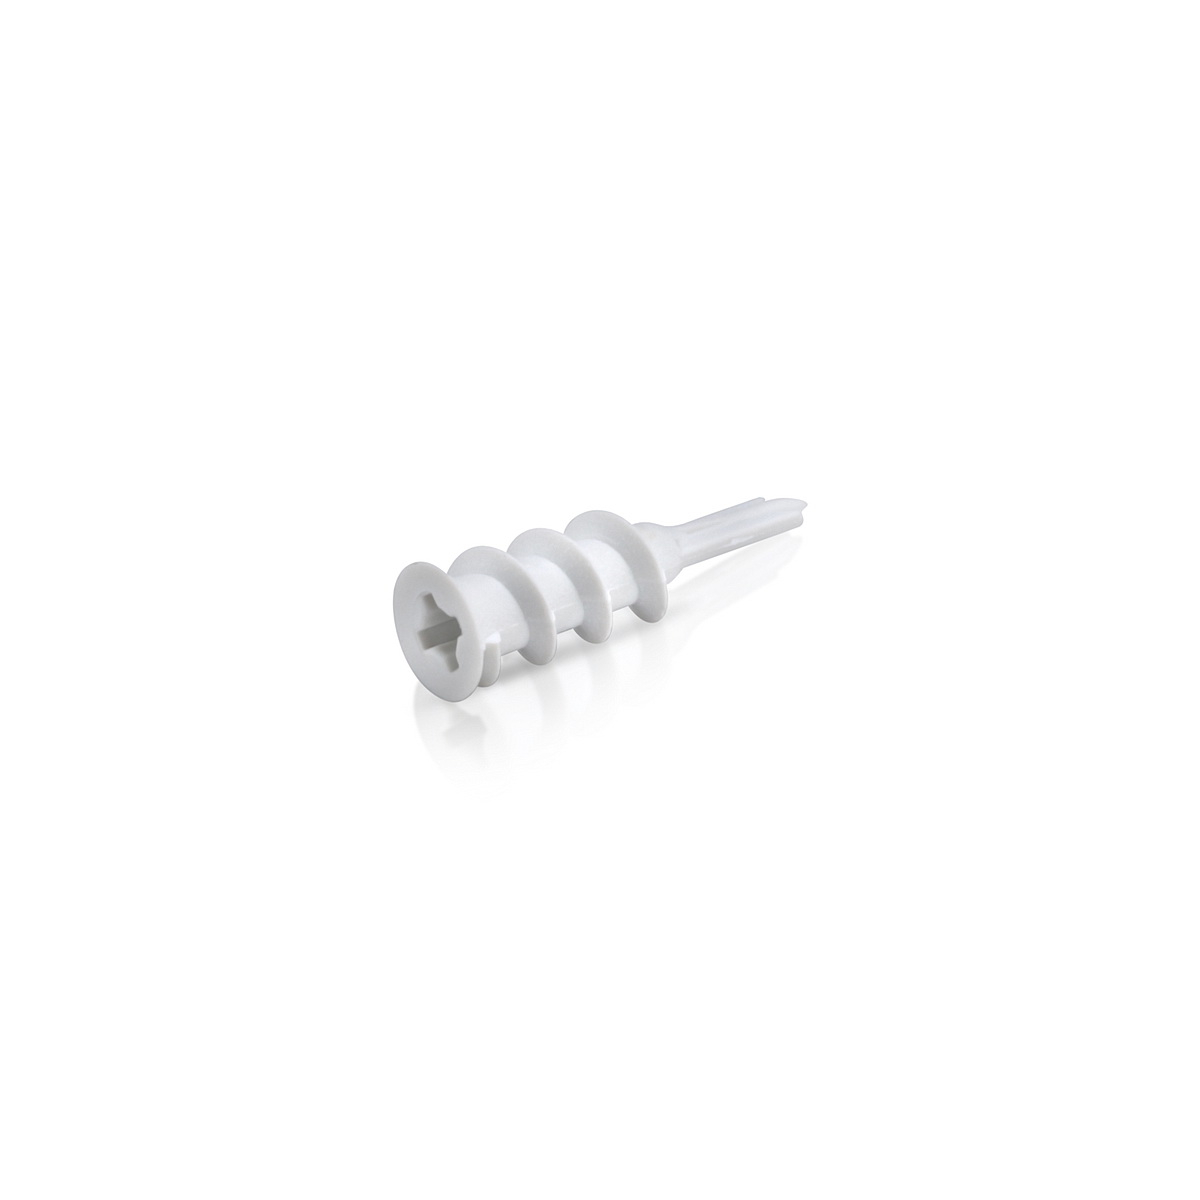 Cost Effective Small Nylon Speed Anchor for #6 Screw for Drywall